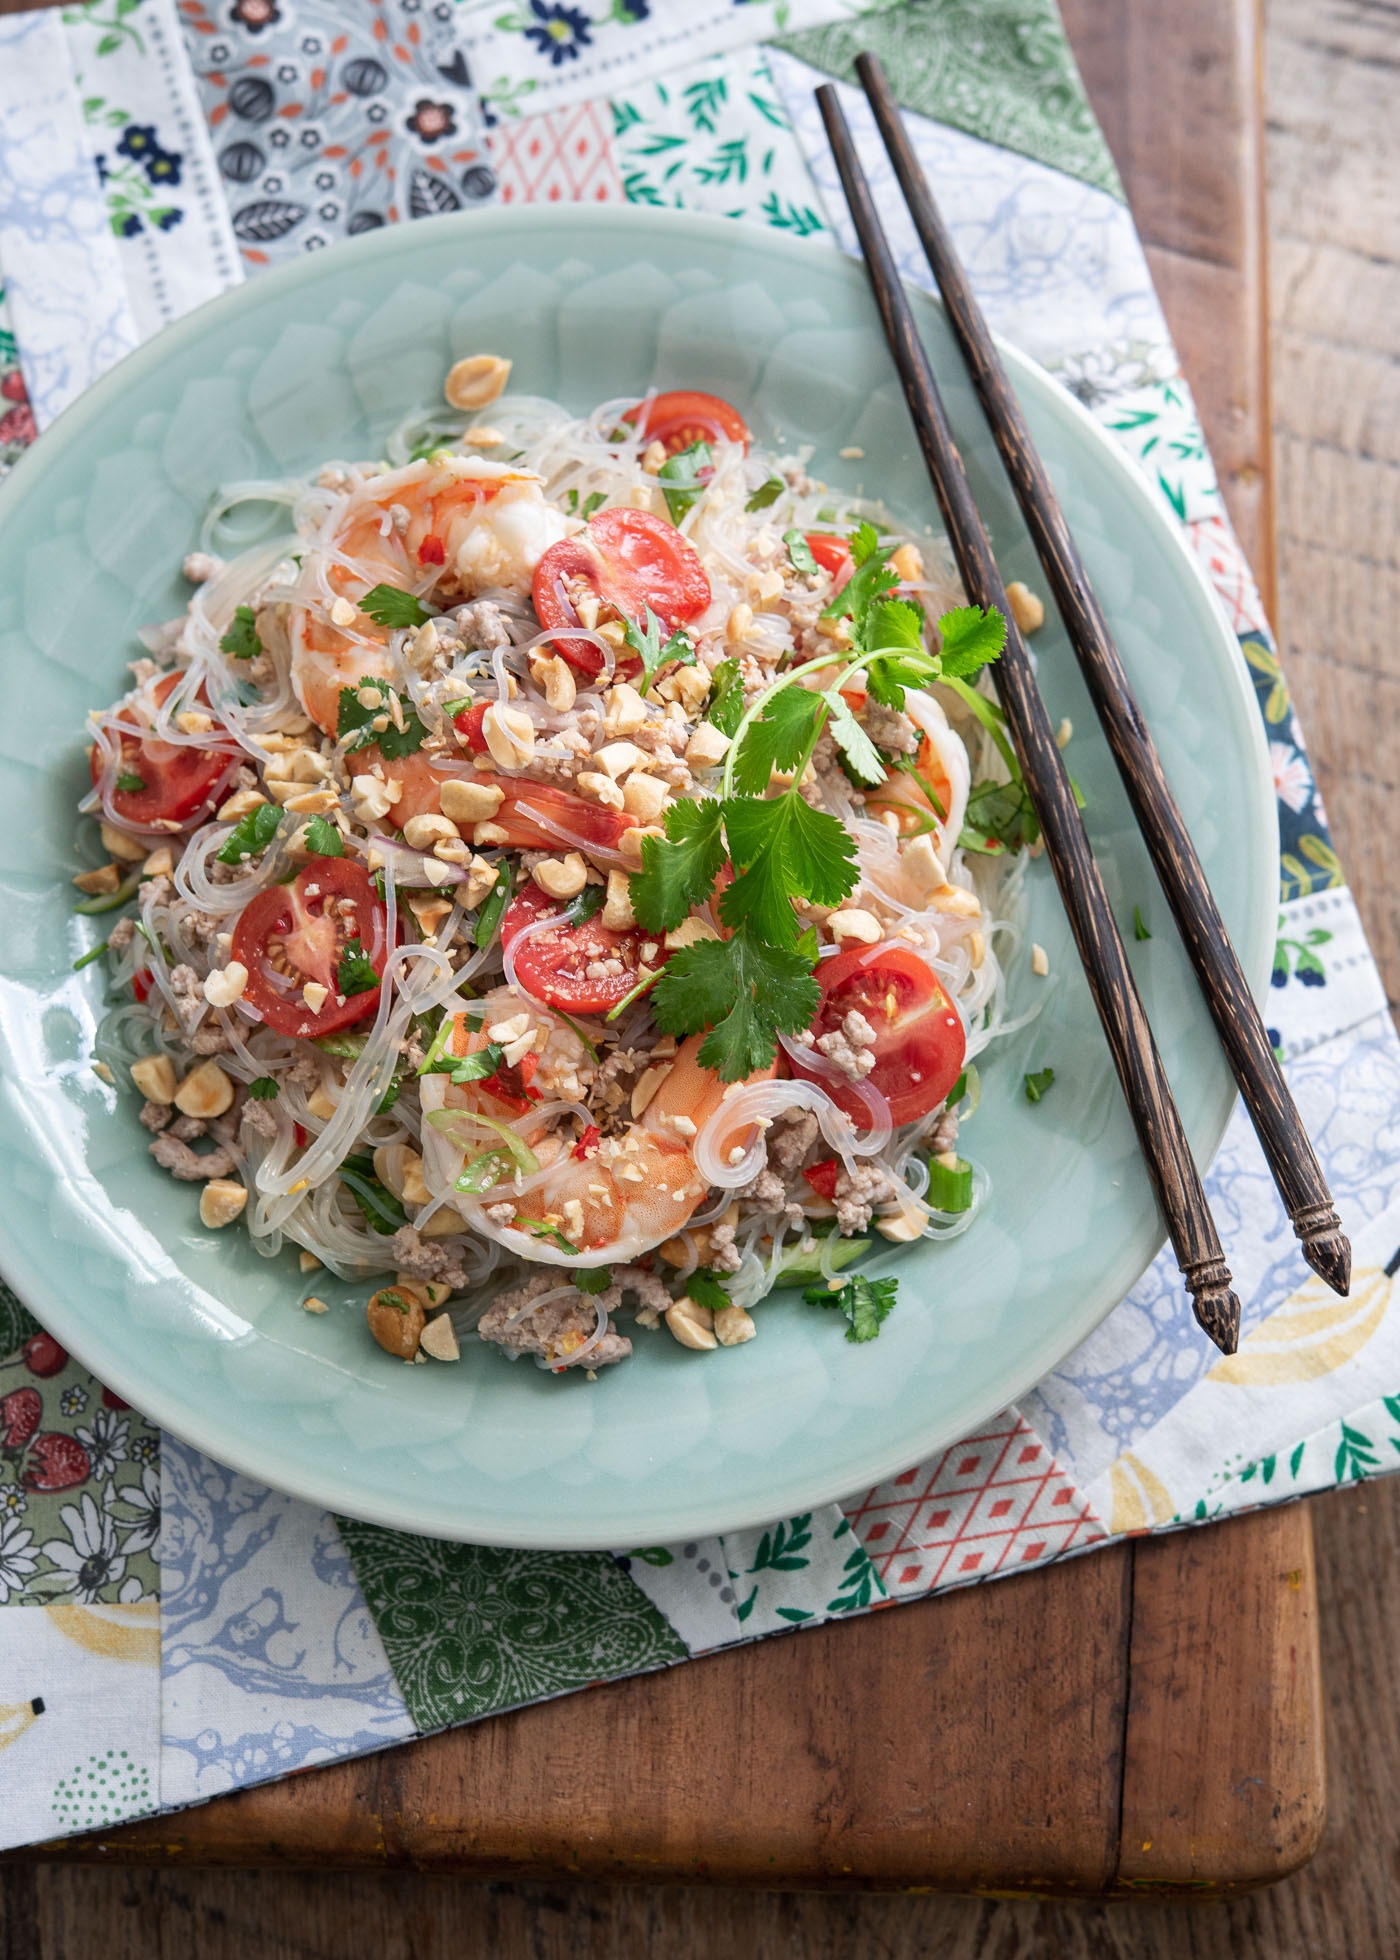 Thai glass noodle salad with shrimp is served in a green dish with chopsticks.